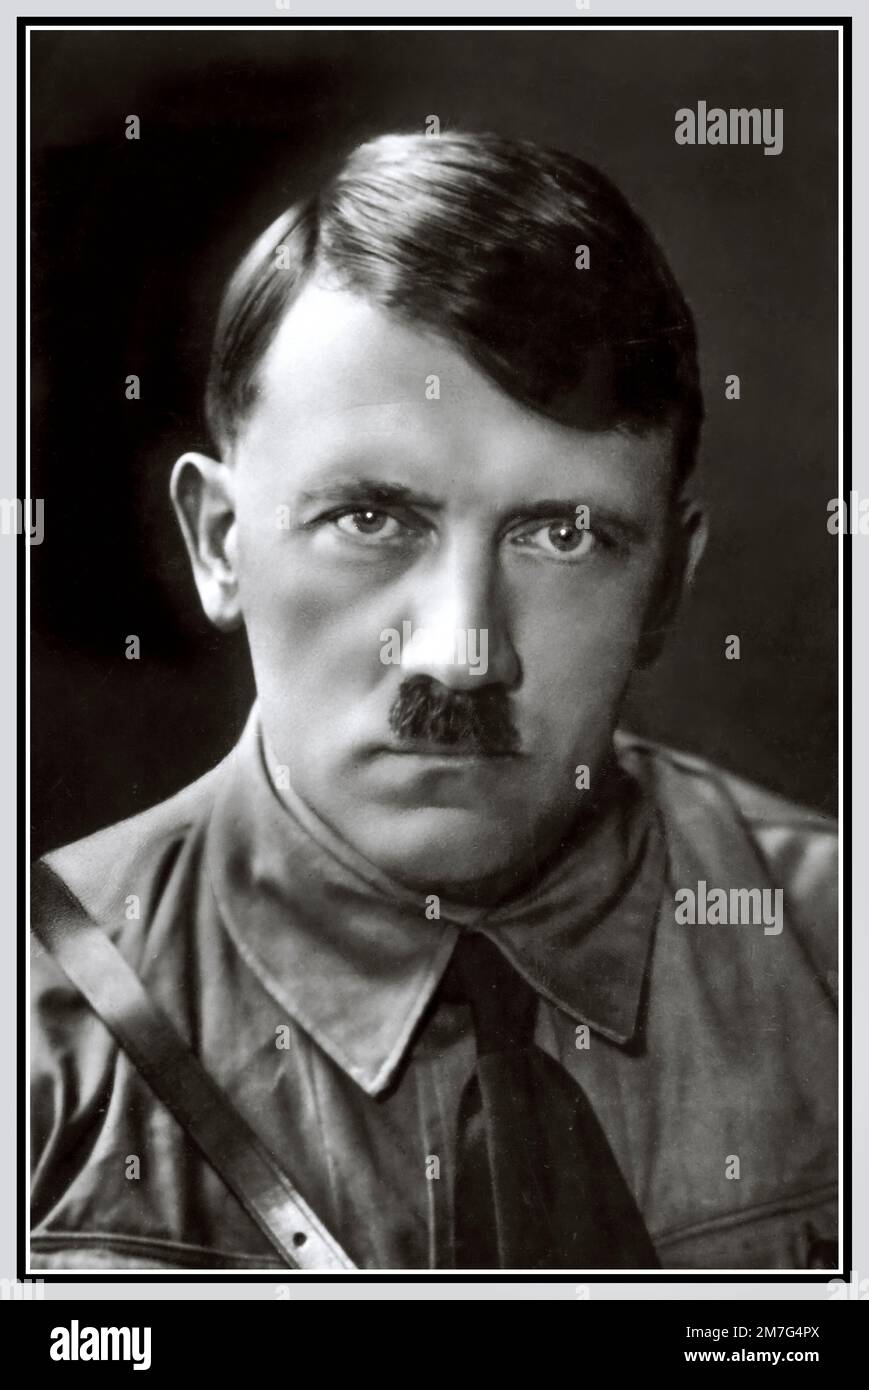 Adolf Hitler portrait in NSDAP Sturmabteilung Nazi uniform in the pre-war 1930's photographed by Hoffmann for his book Mein Kampf Stock Photo